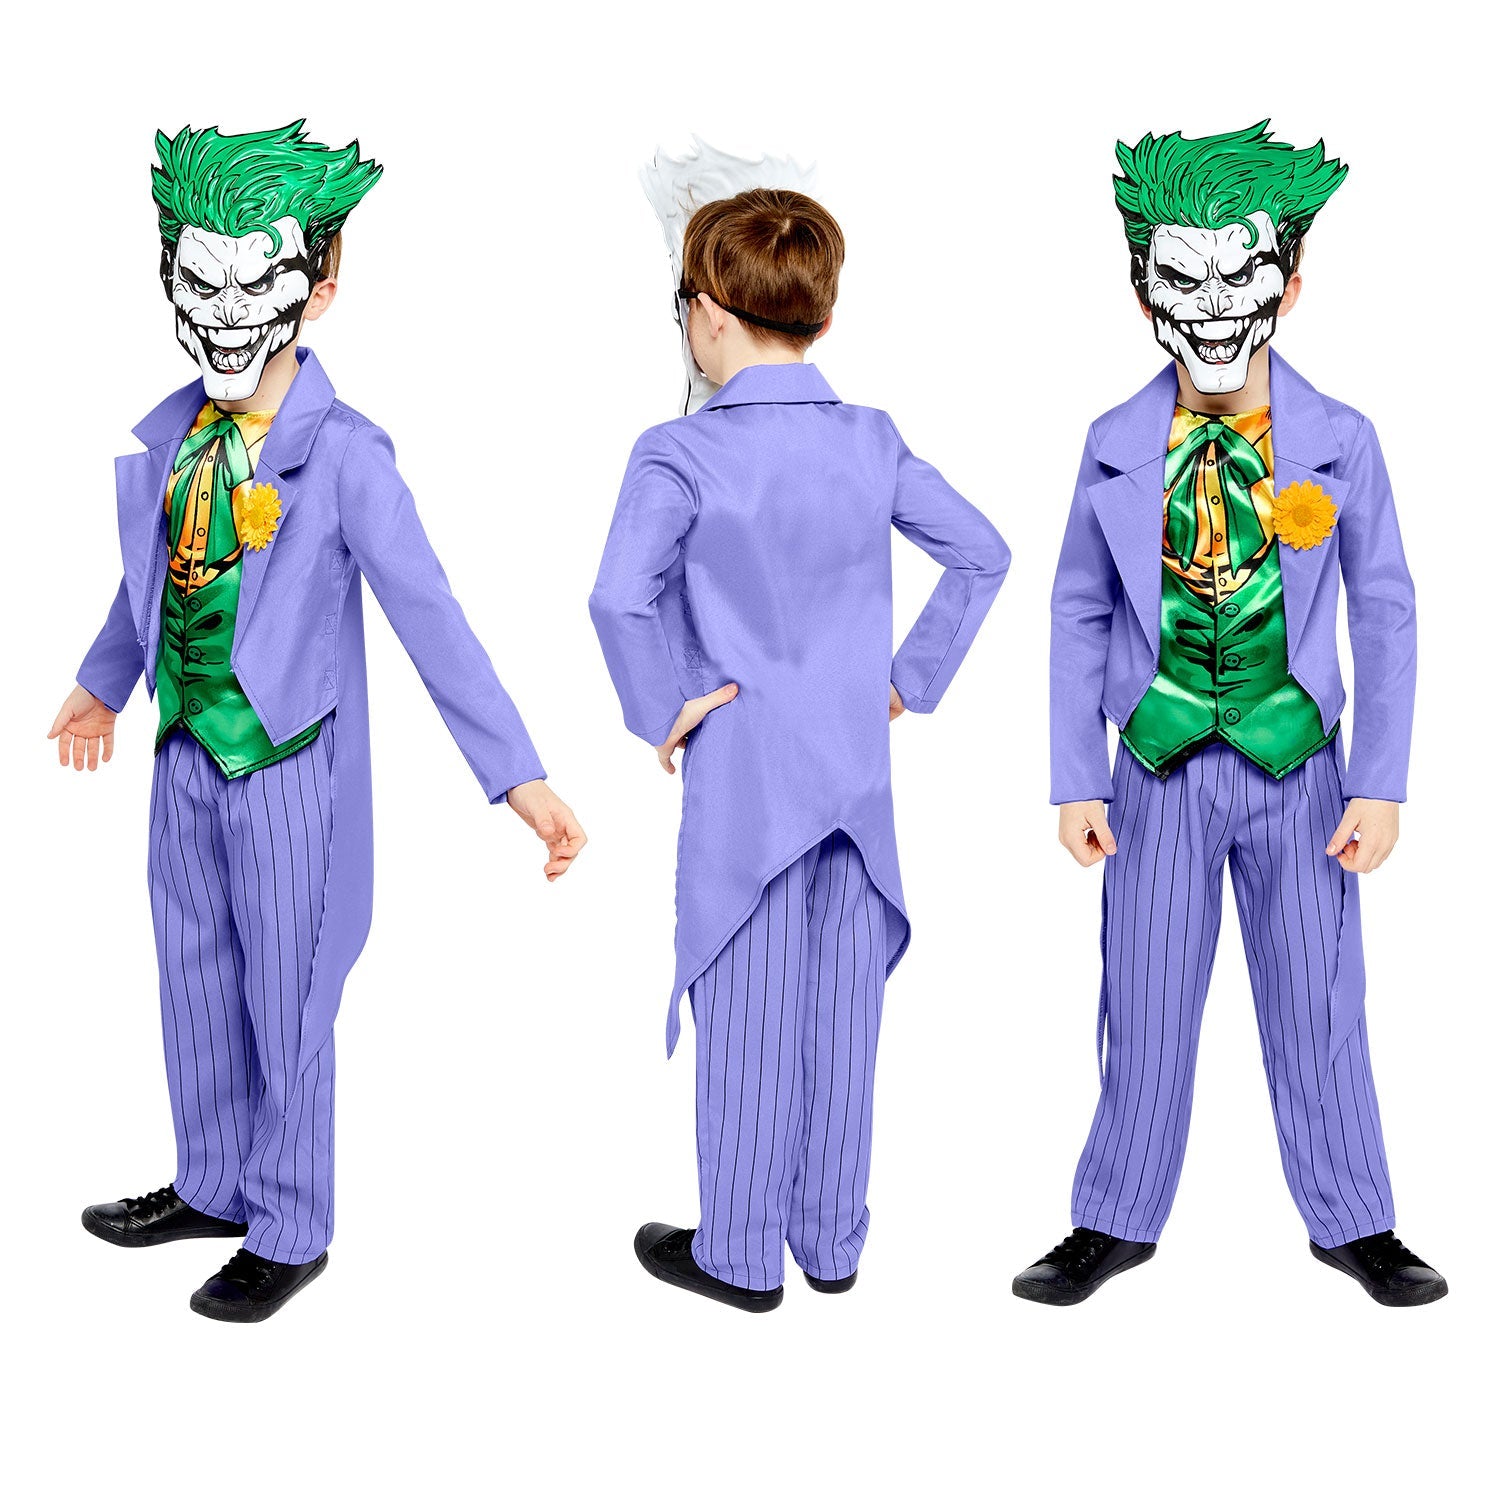 Joker Comic Style Costume includes jacket with 3D fabric flower on collar and attached top, trousers and EVA mask